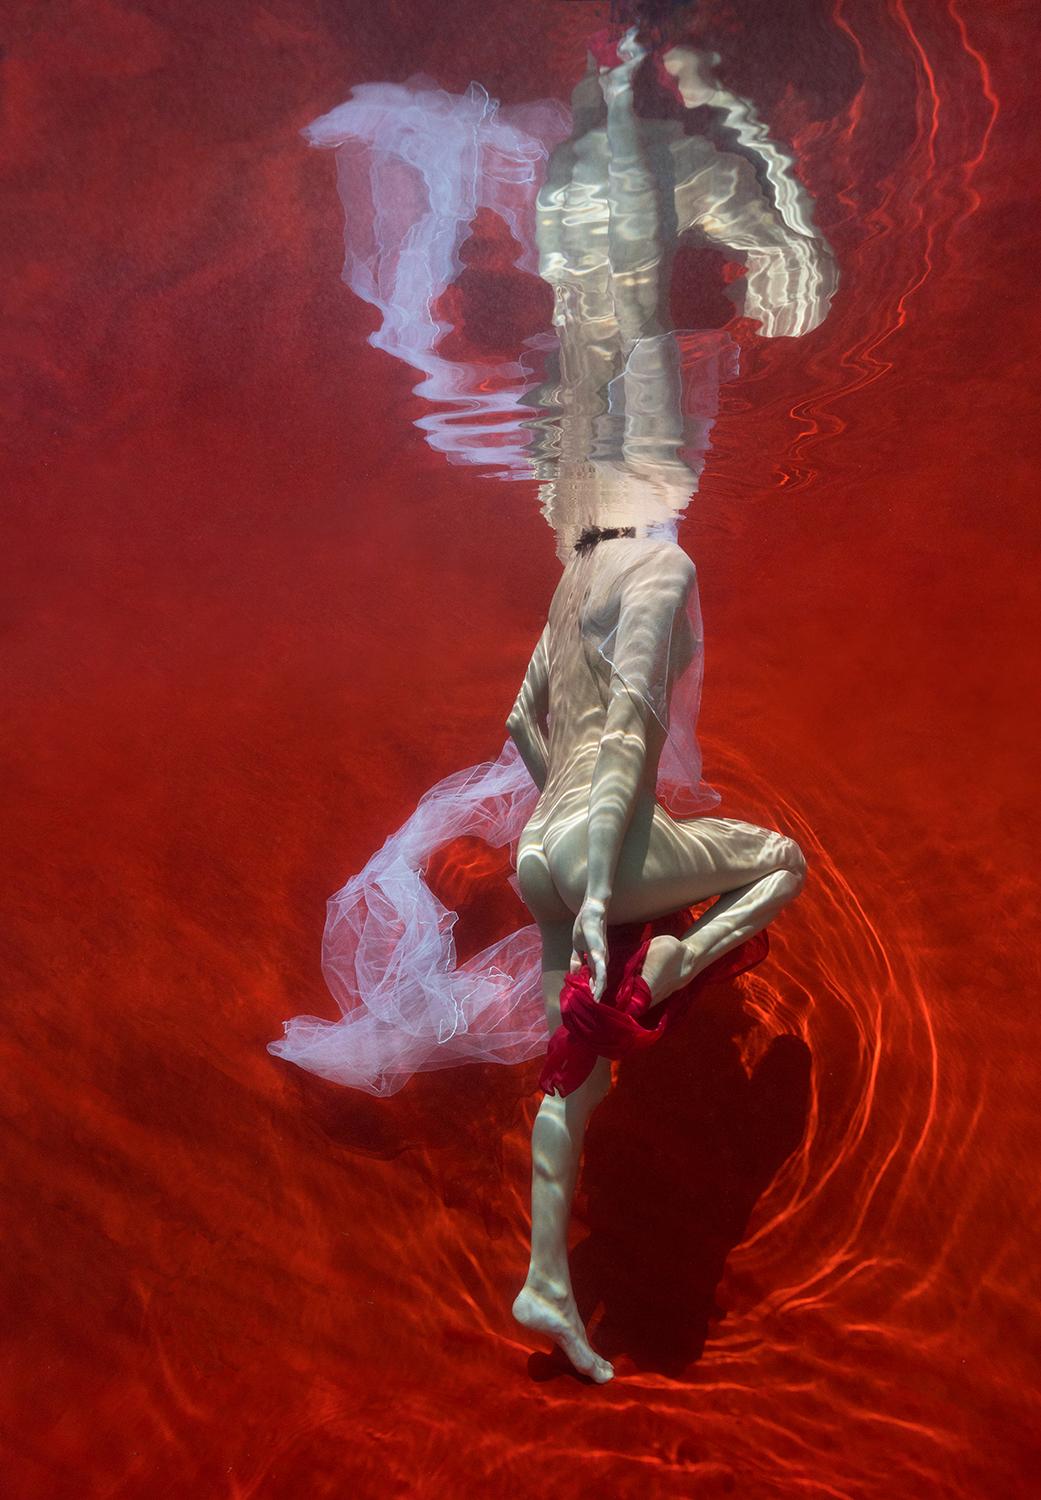 Alex Sher Nude Photograph - Blood and Milk VII  - underwater nude photograph - print on aluminum 36" x 25"